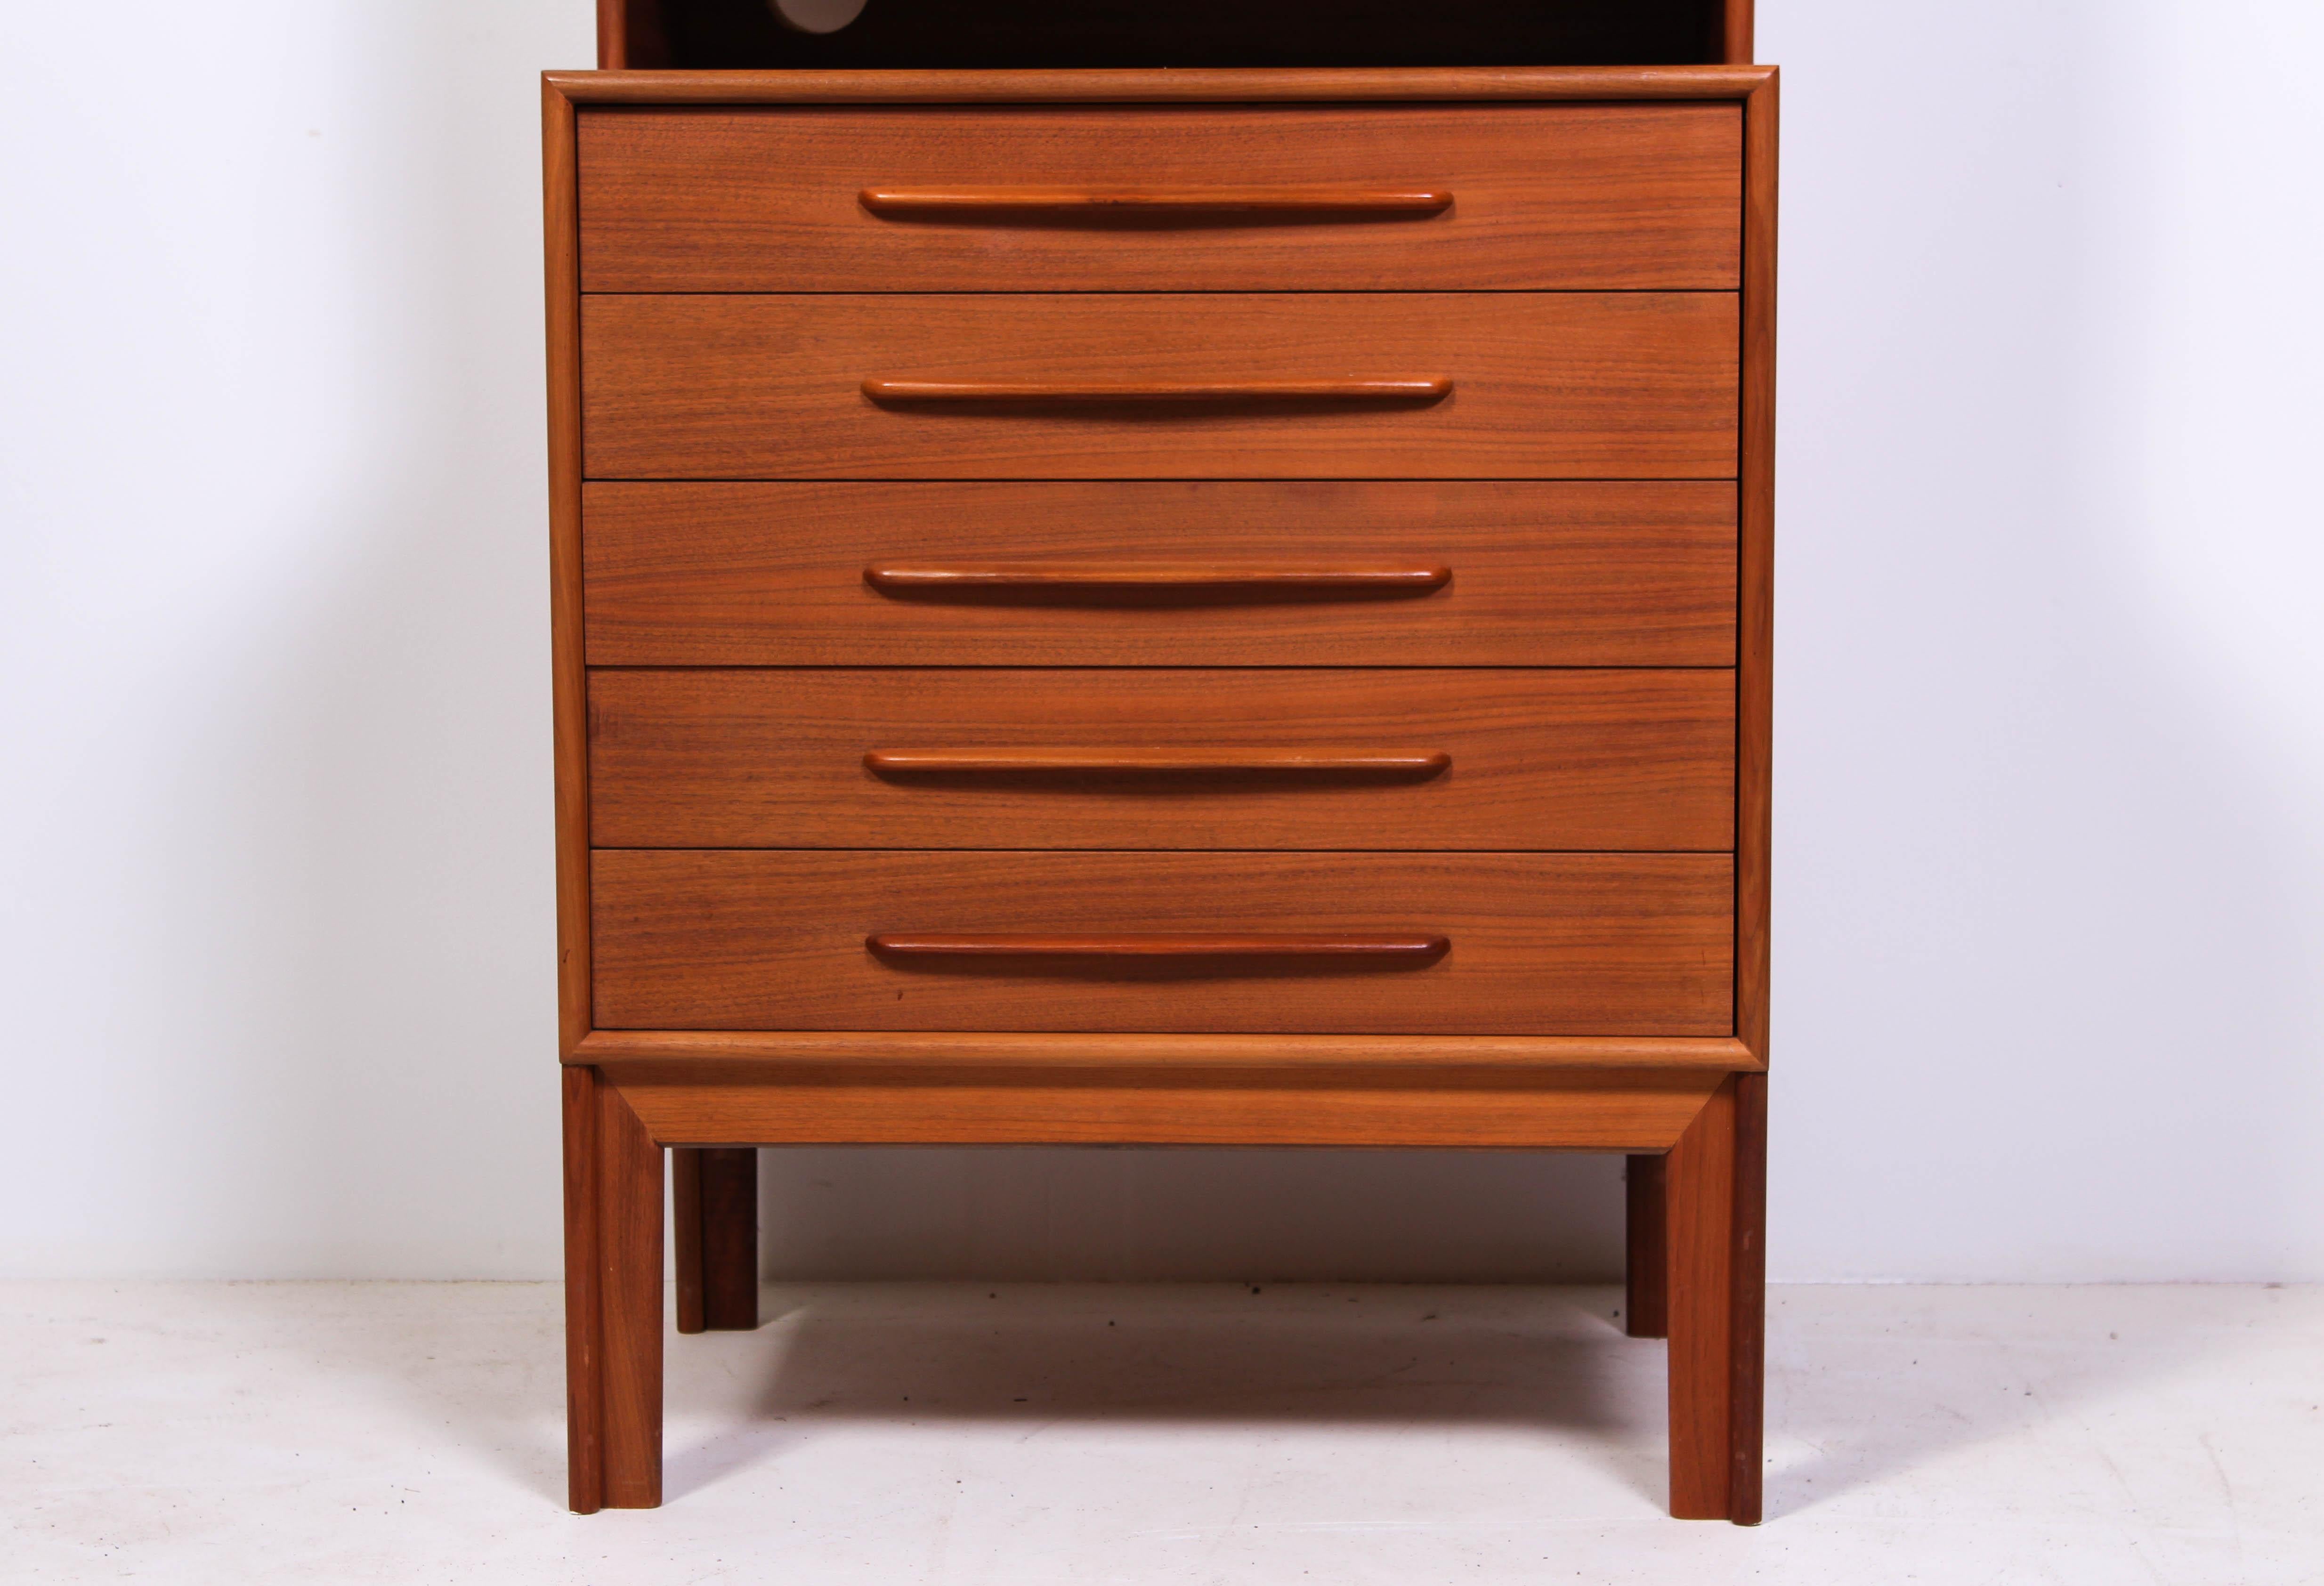 A midcentury teak bookcase by Alf Svensson, produced by Bjästa möbelfabrik in the 1950s. The book case is in very good vintage condition, a circular hole is cut out from the back of the top piece for electronic cords. 

The top can be taken of so